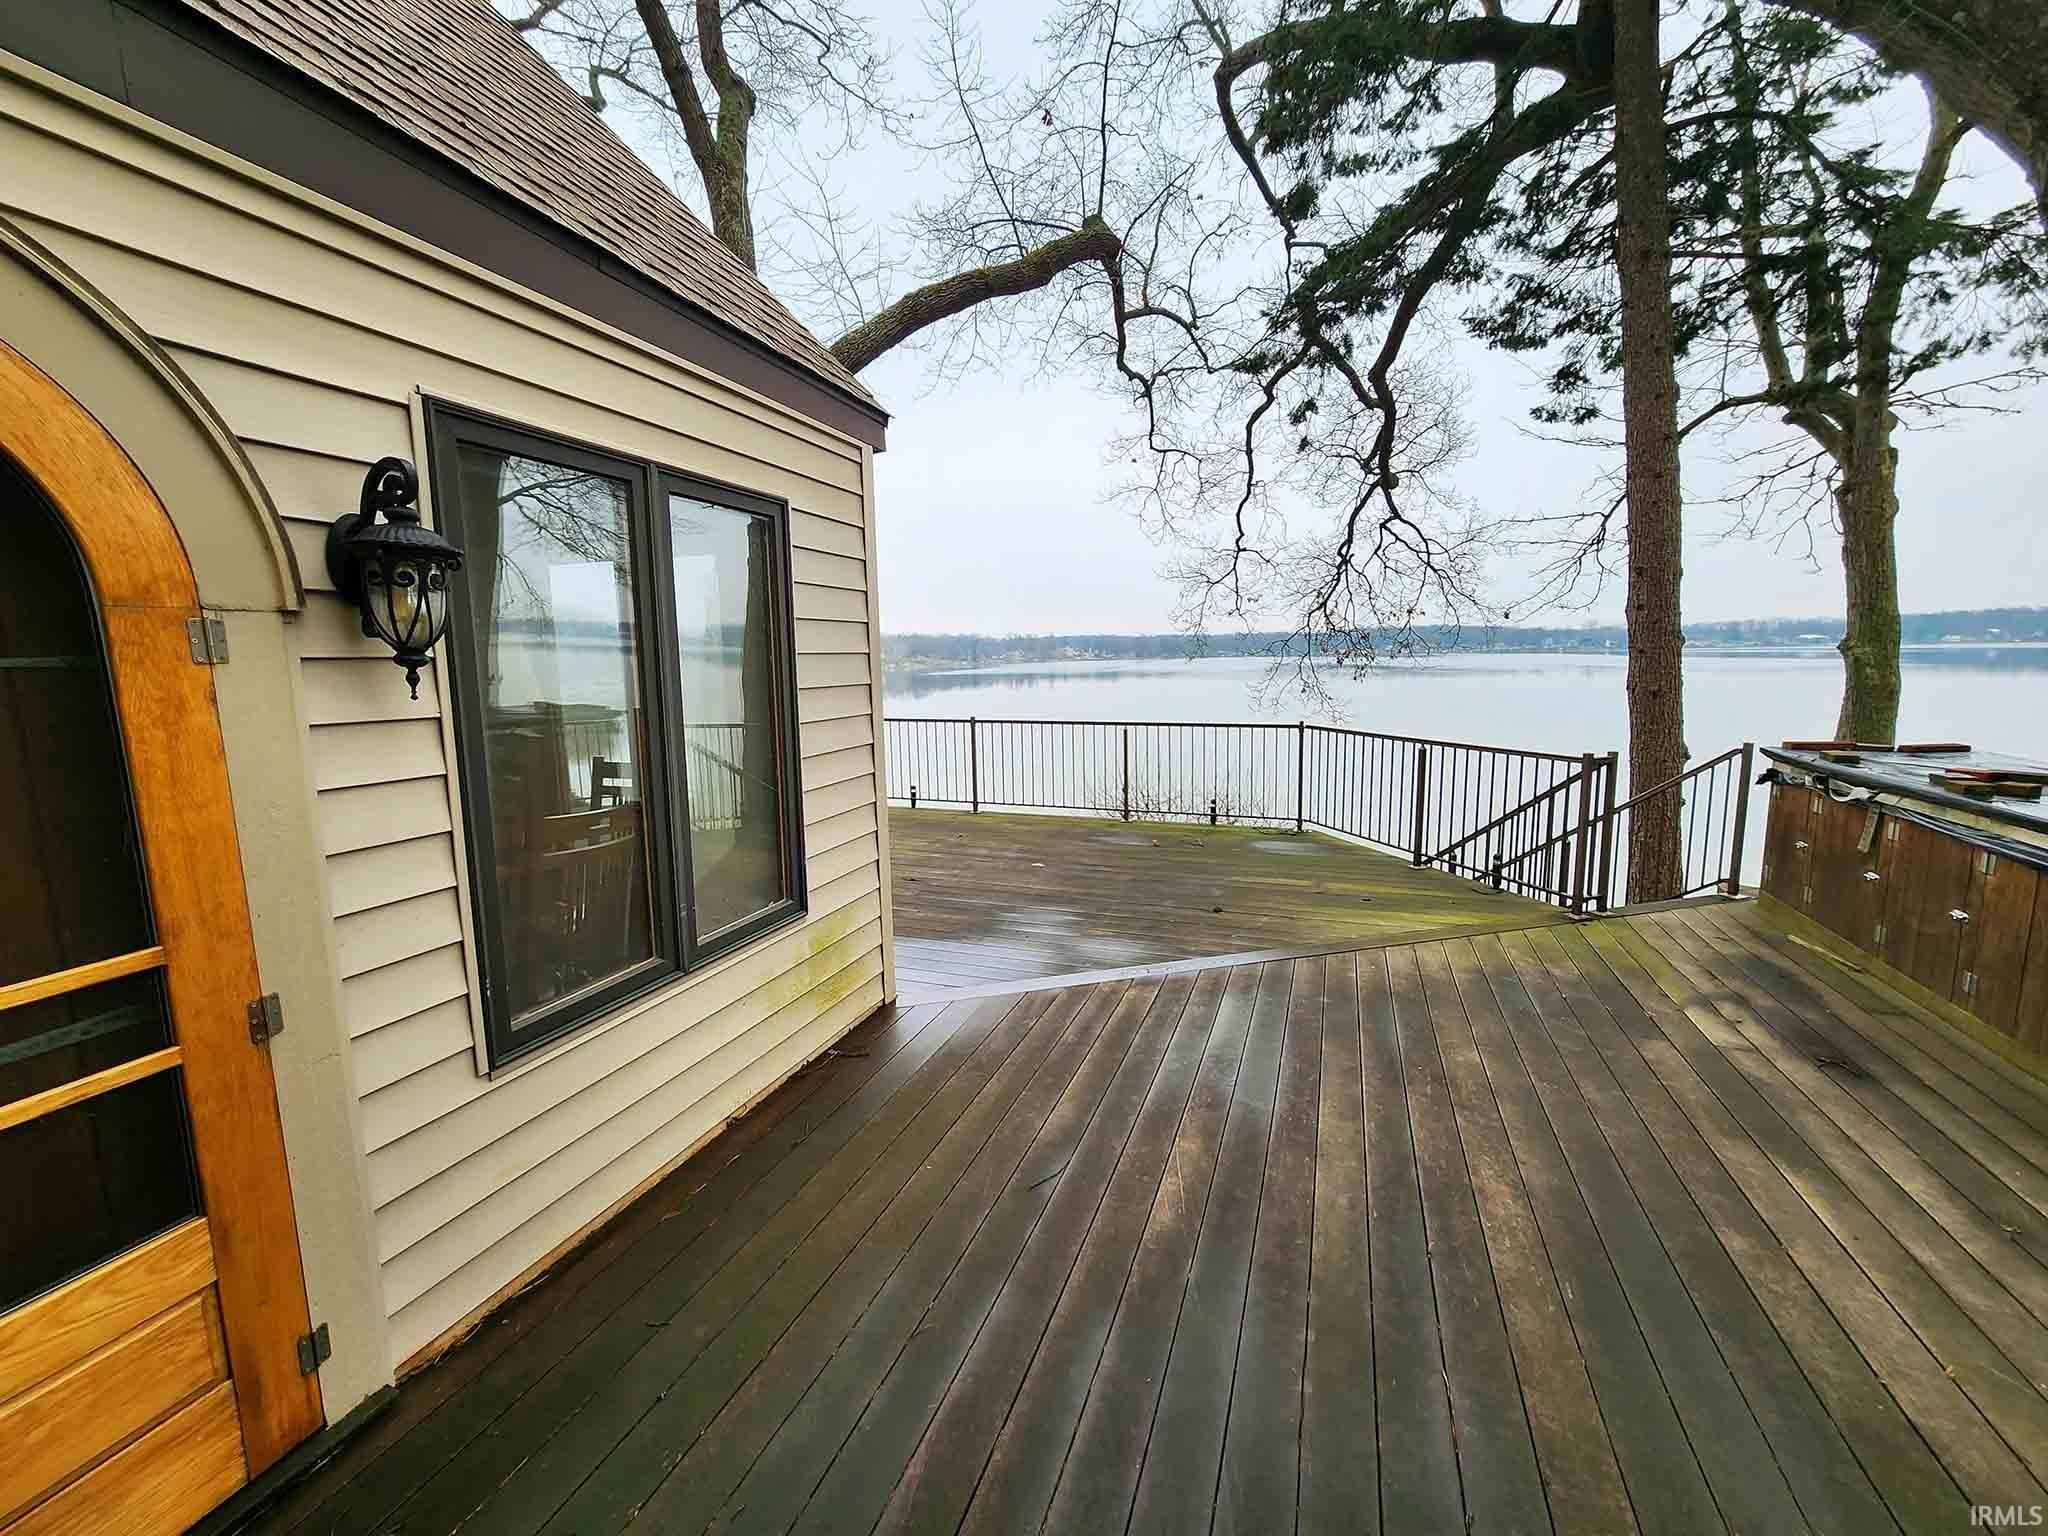 Lakeside deck and side of home.